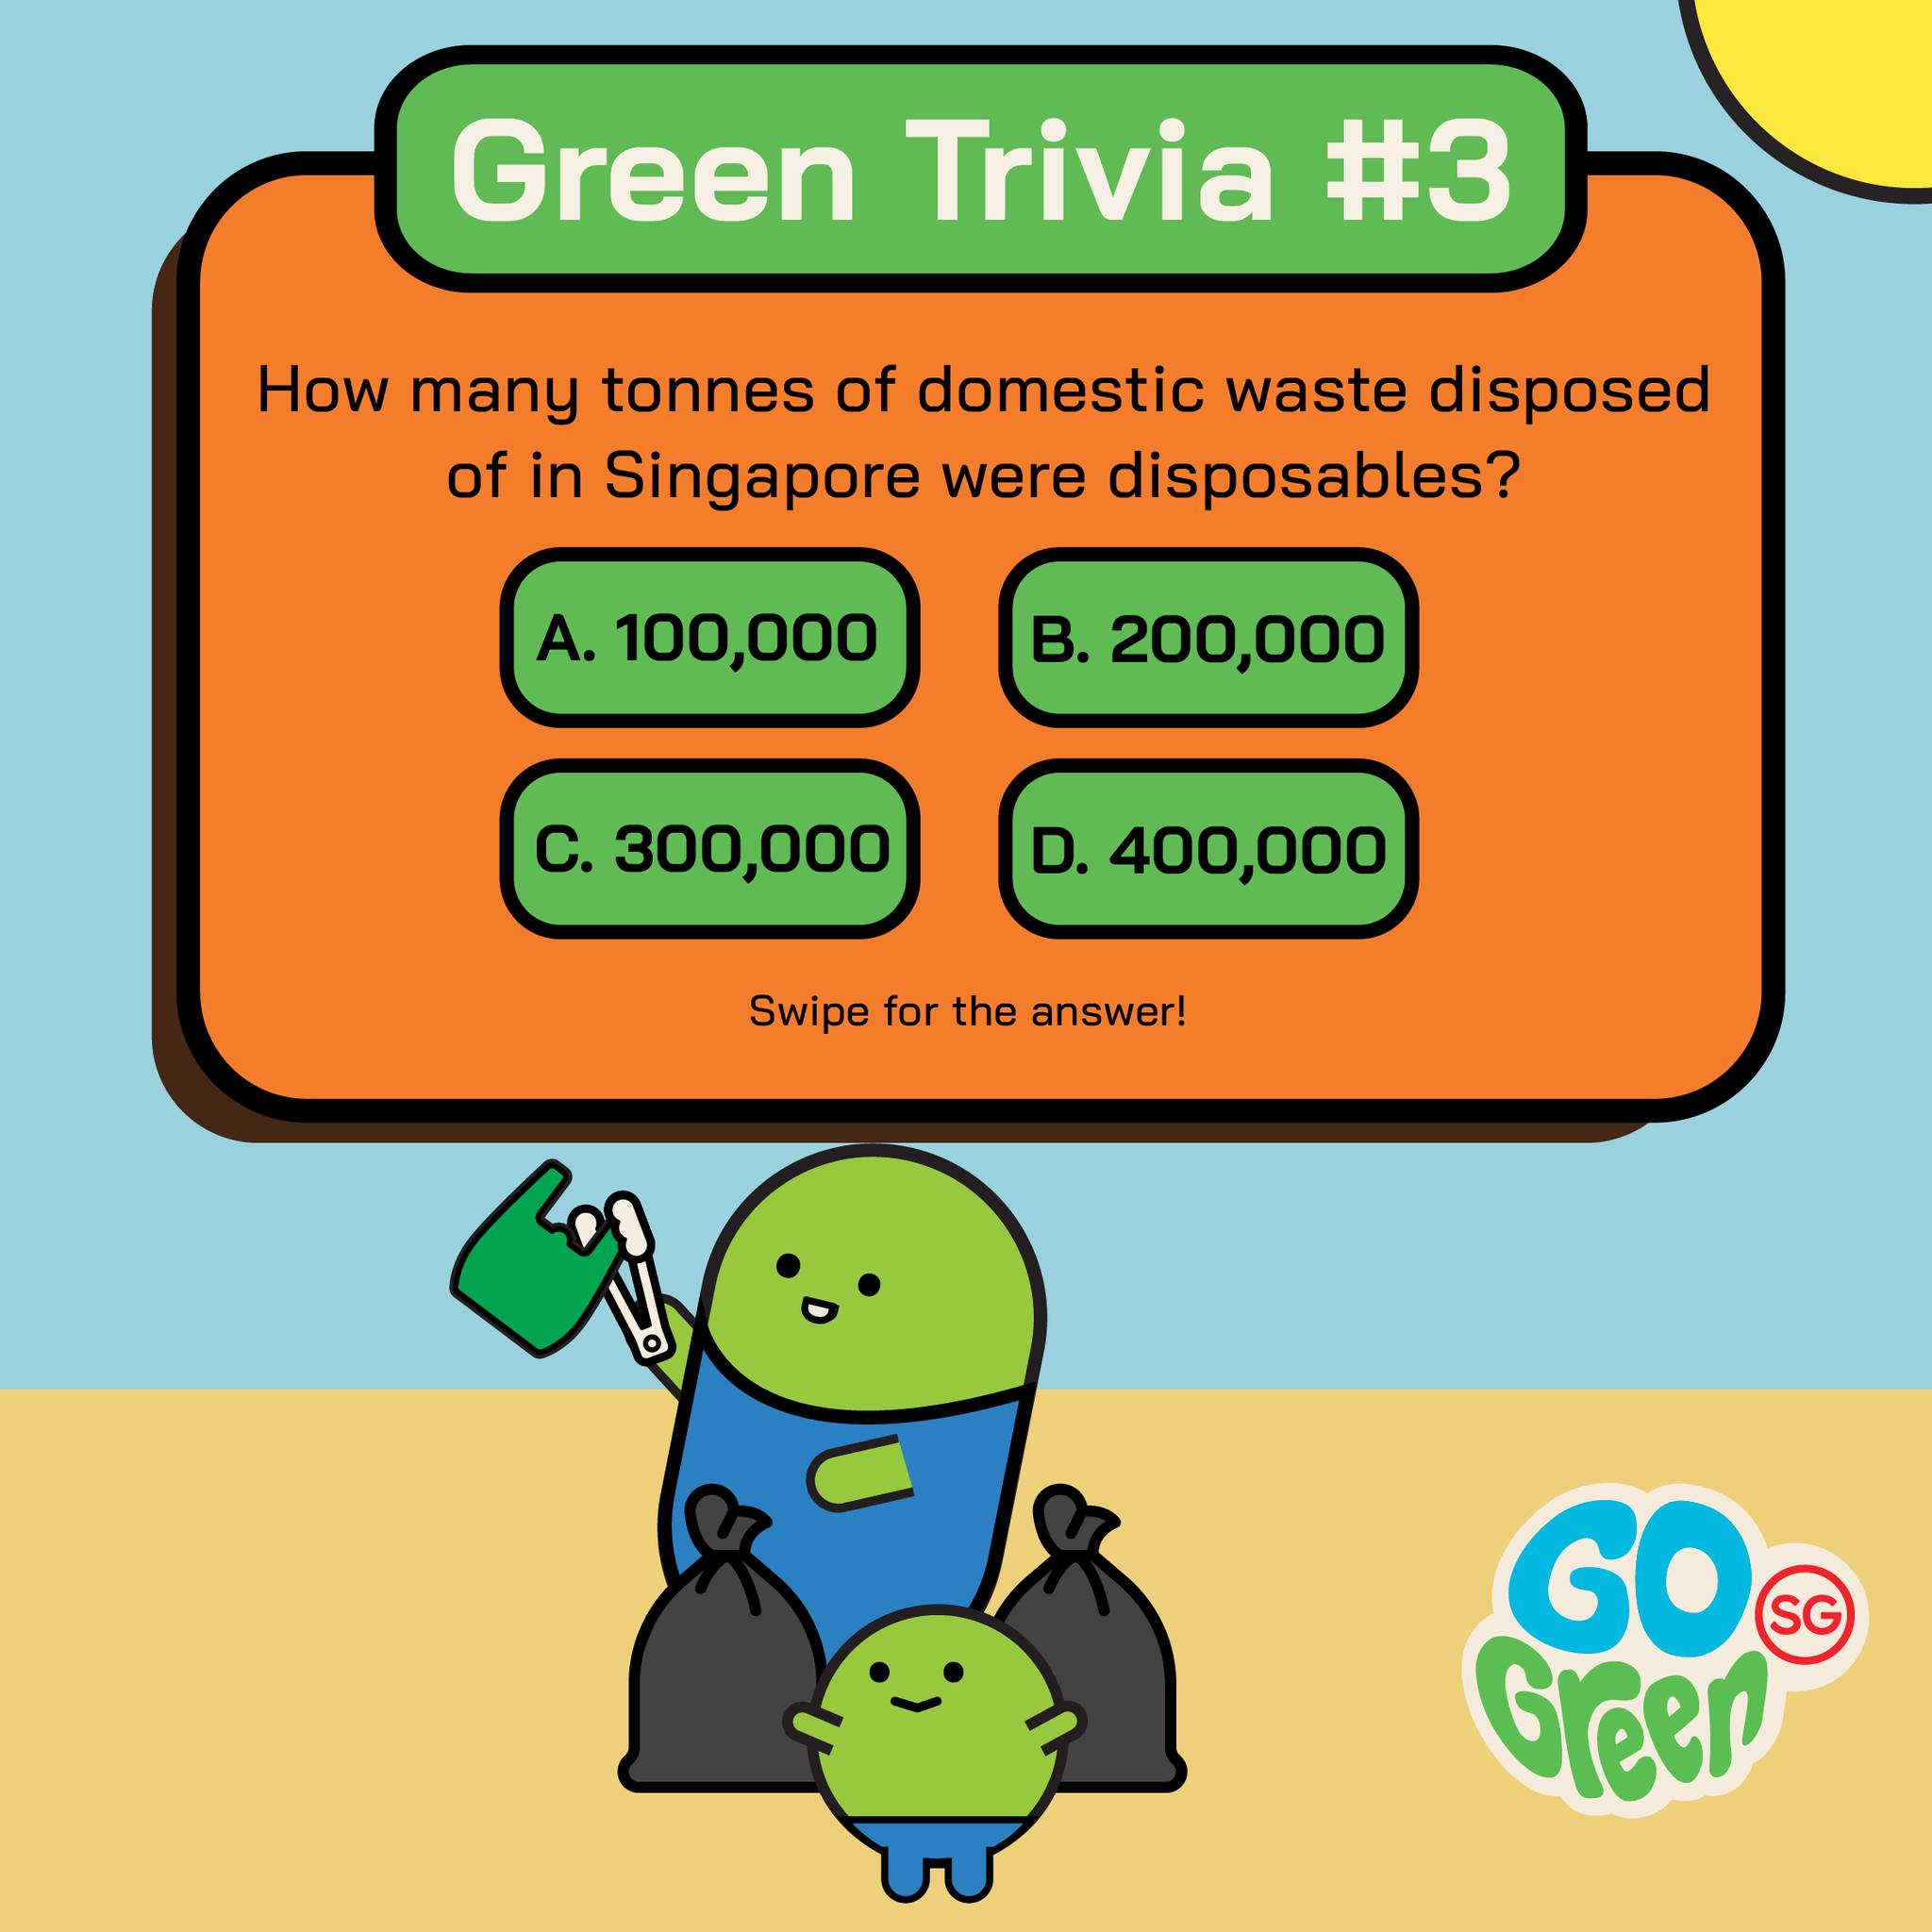 Have Fun Going Green with These Green Trivia!